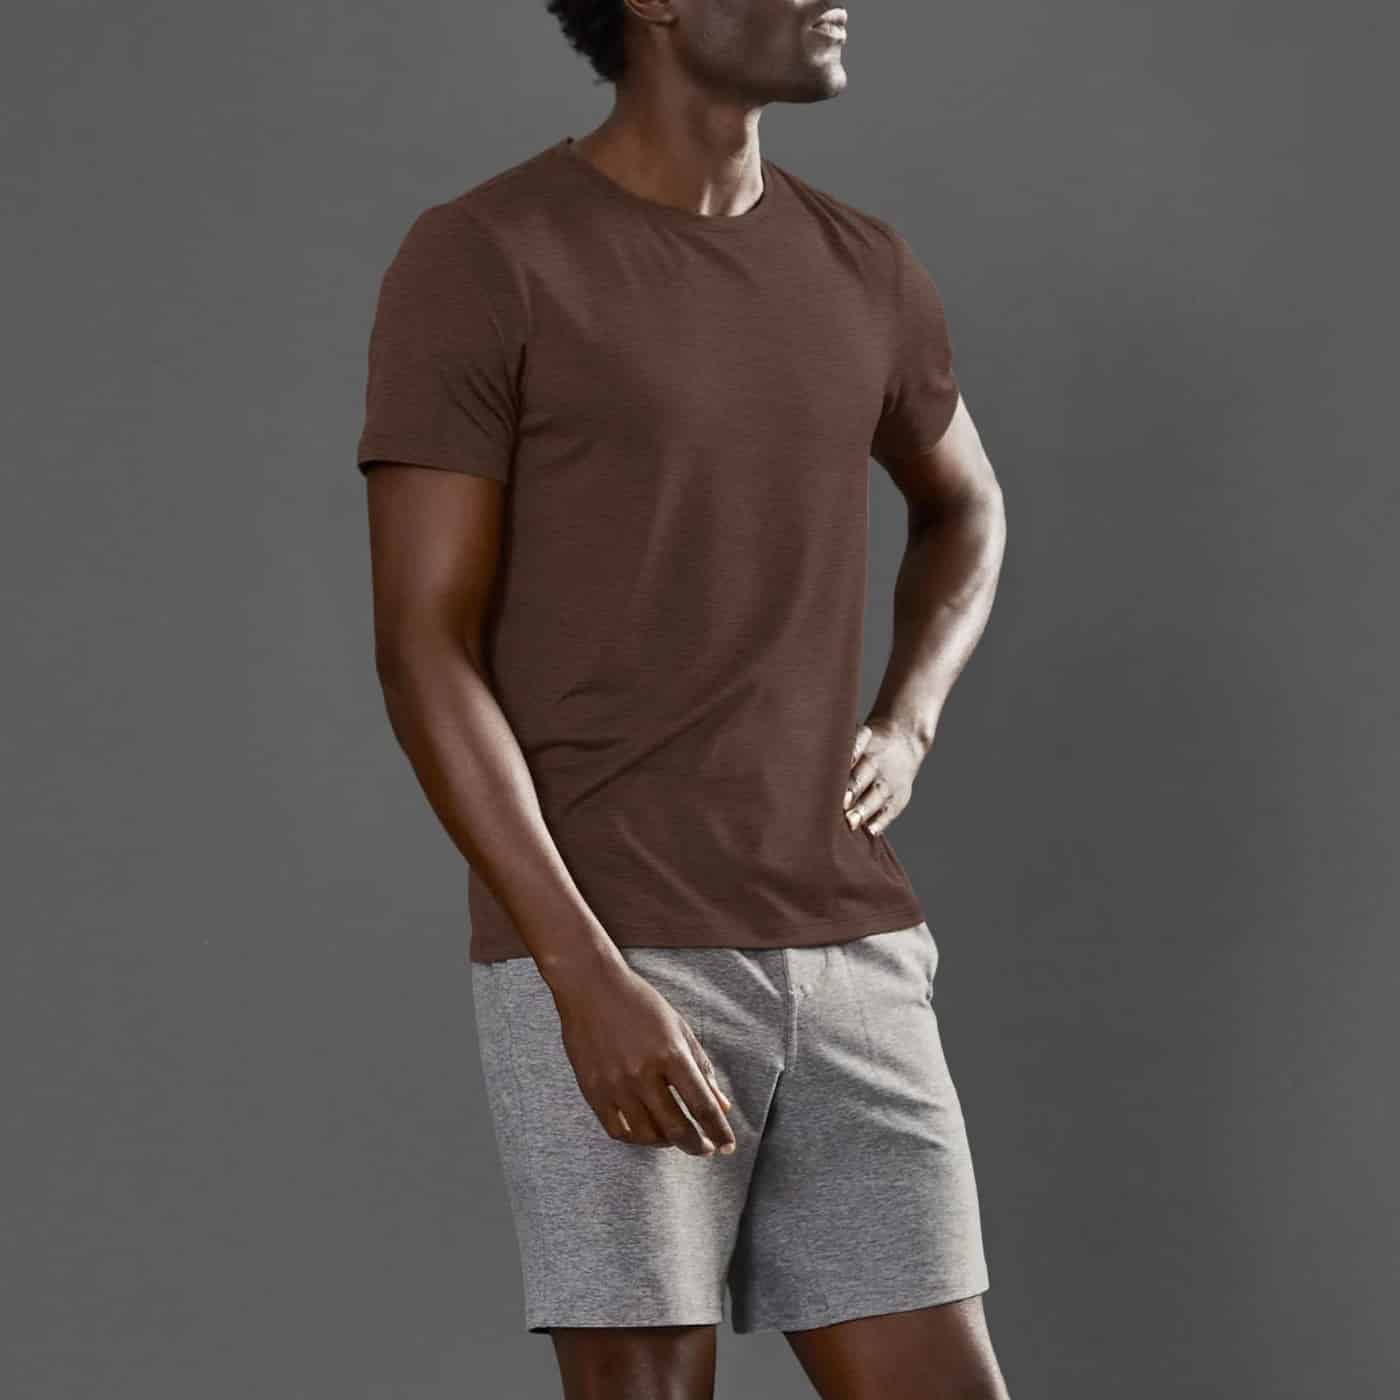 12 Types of Yoga Clothing for Men